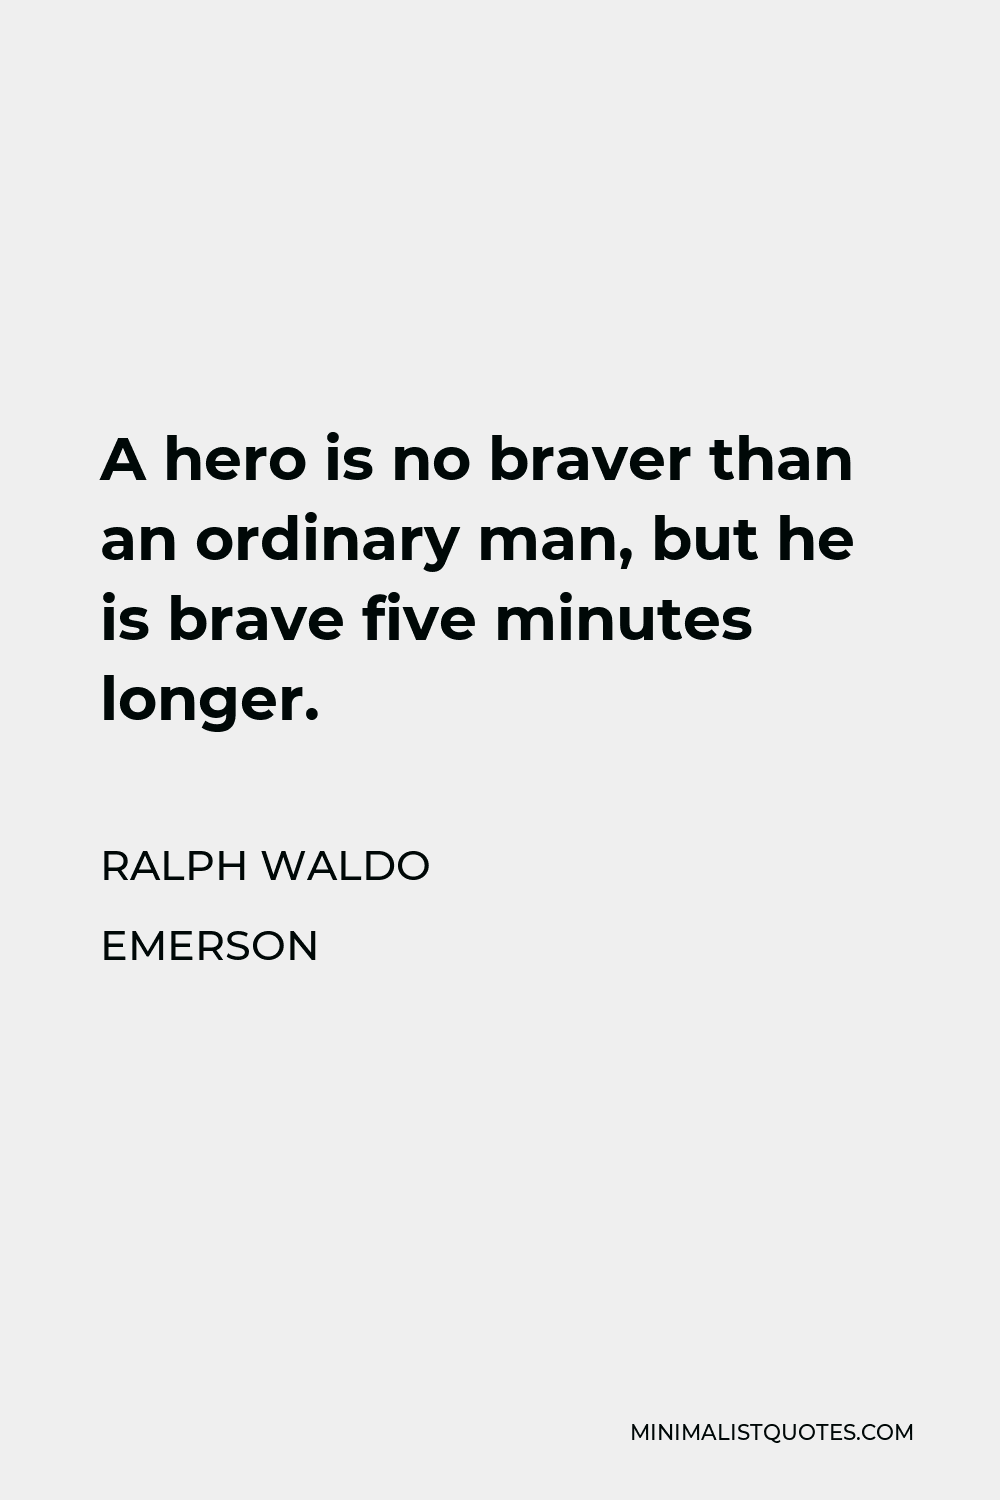 Ralph Waldo Emerson Quote - A hero is no braver than an ordinary man, but he is brave five minutes longer.